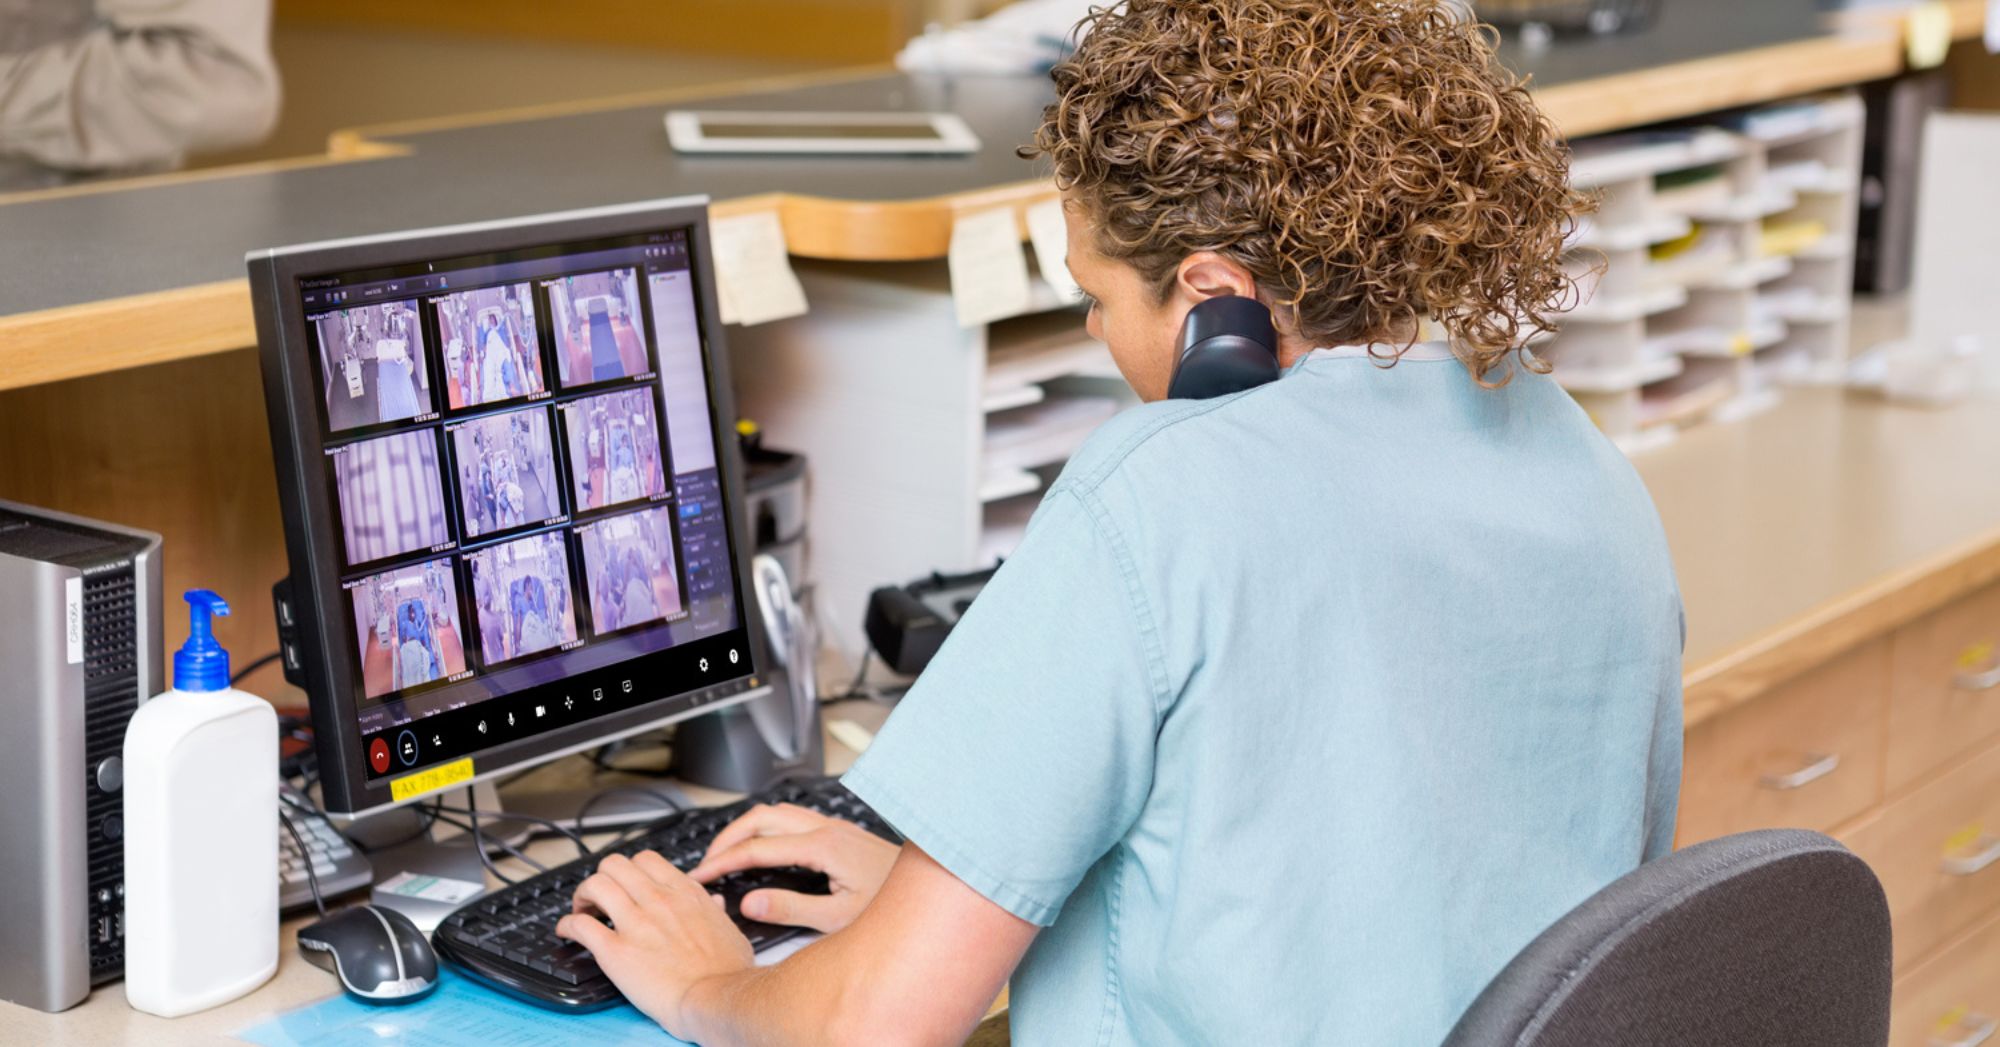 Nurse using telesitter solution to observe multiple patients from her desktop while speaking on the phone.